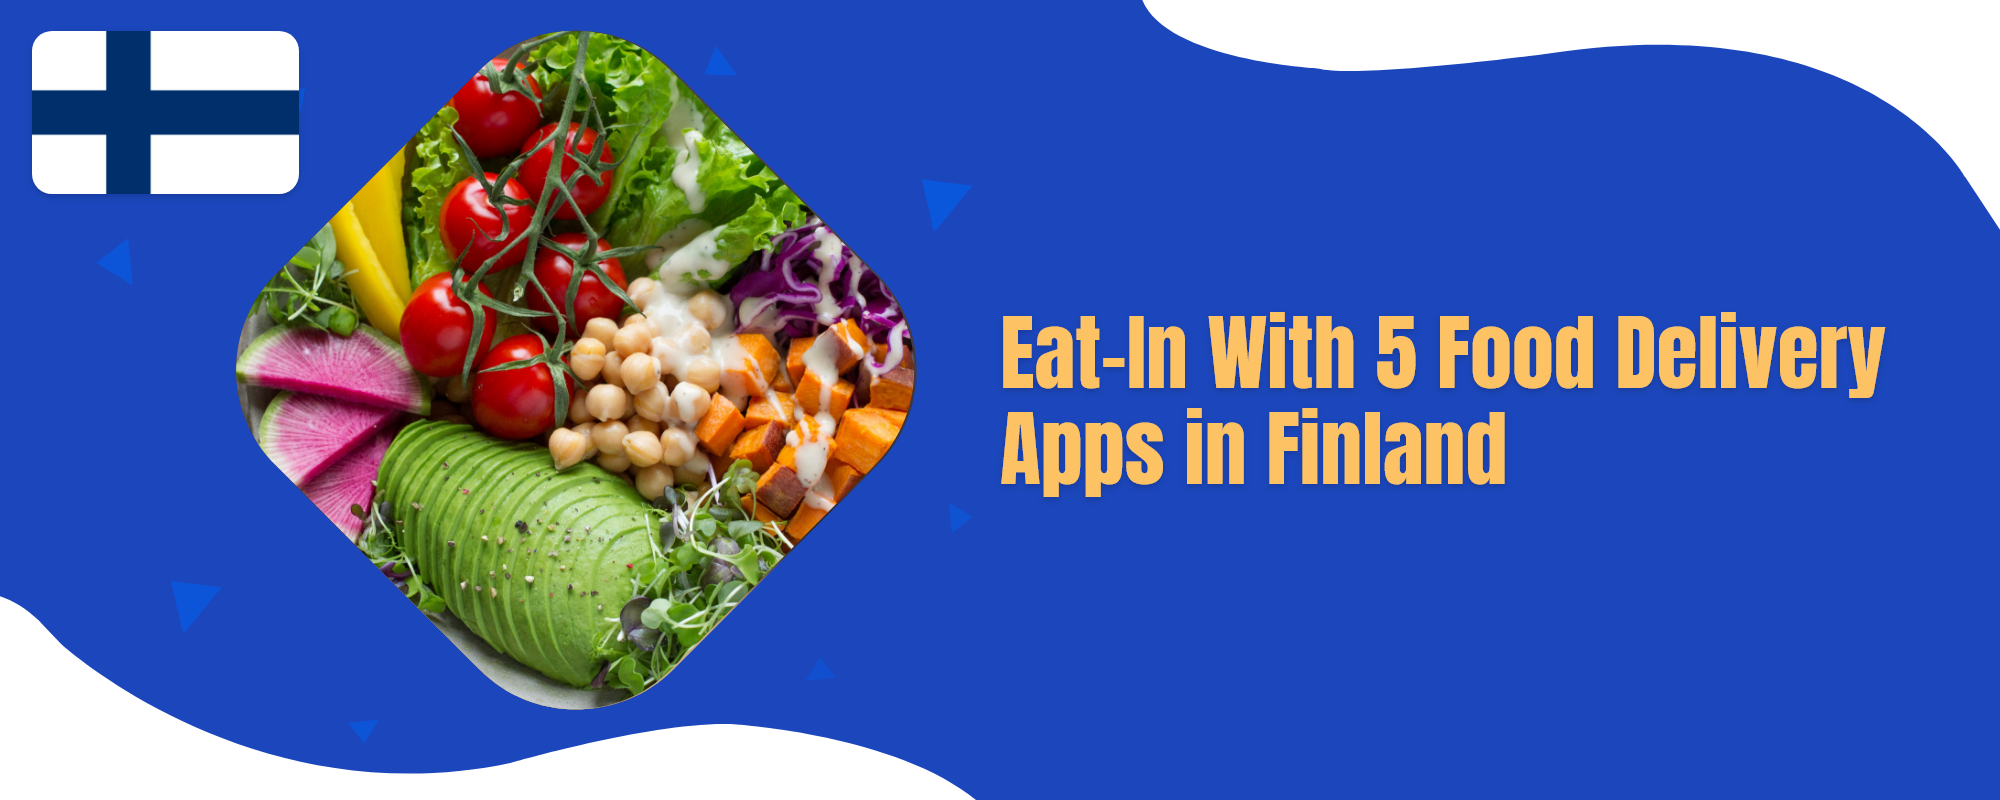 Food delivery apps In Finland